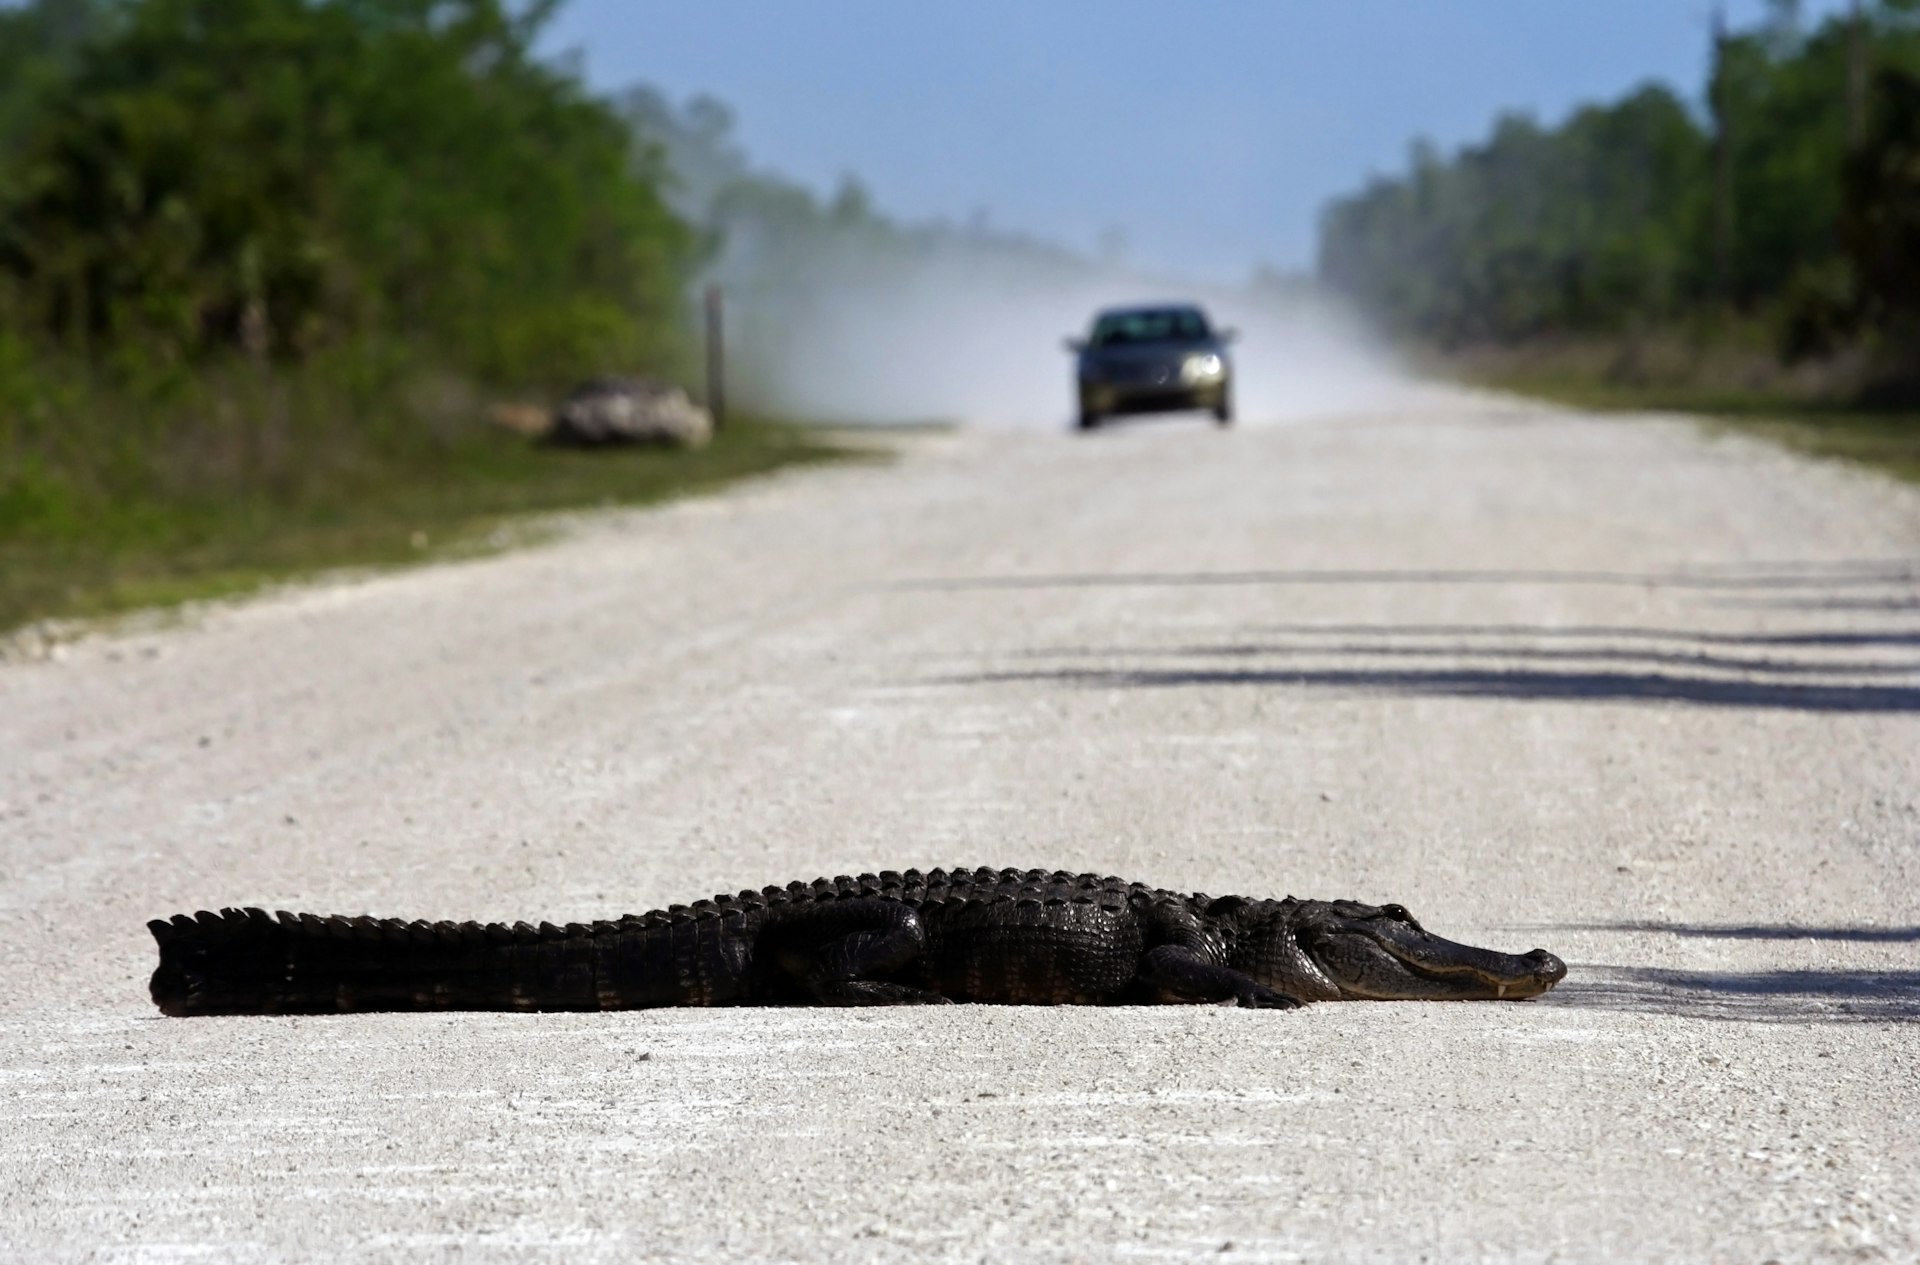 A gator lying in the middle of a dusty road as a car approaches, blurry in the background